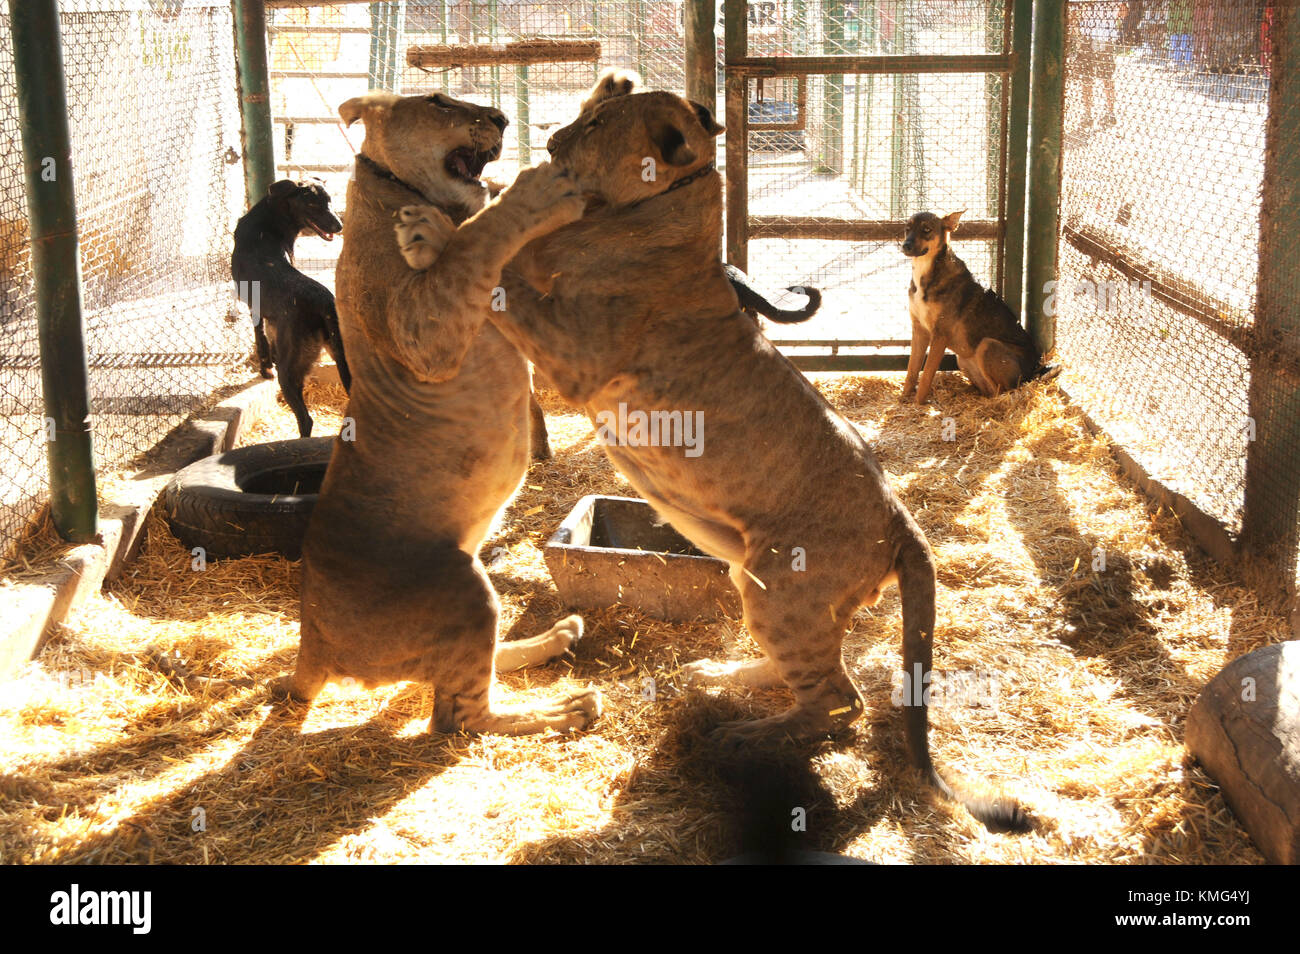 A general view of lions playing in Buenos Aires, Argentina. Photo by Barry King/Alamy Stock Photo